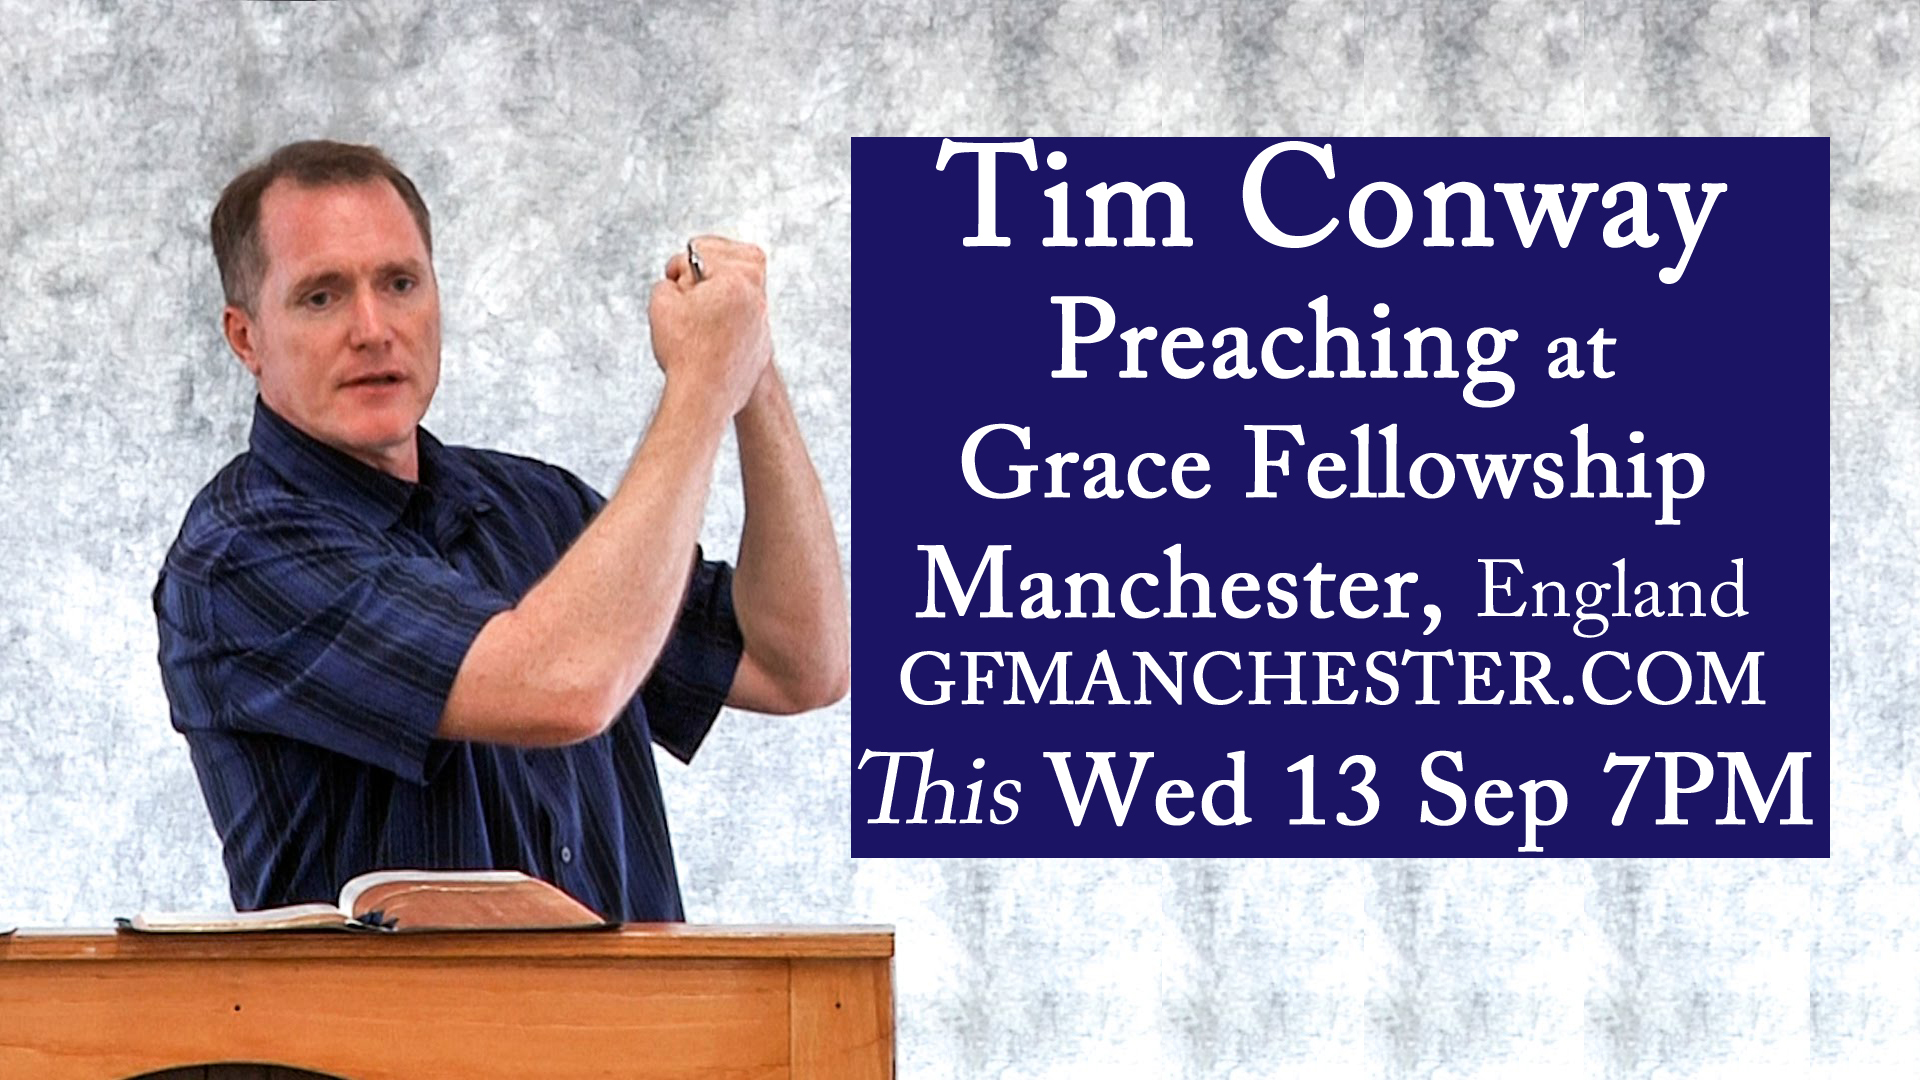 Tim Conway Preaching HERE this Wed 13 Sep